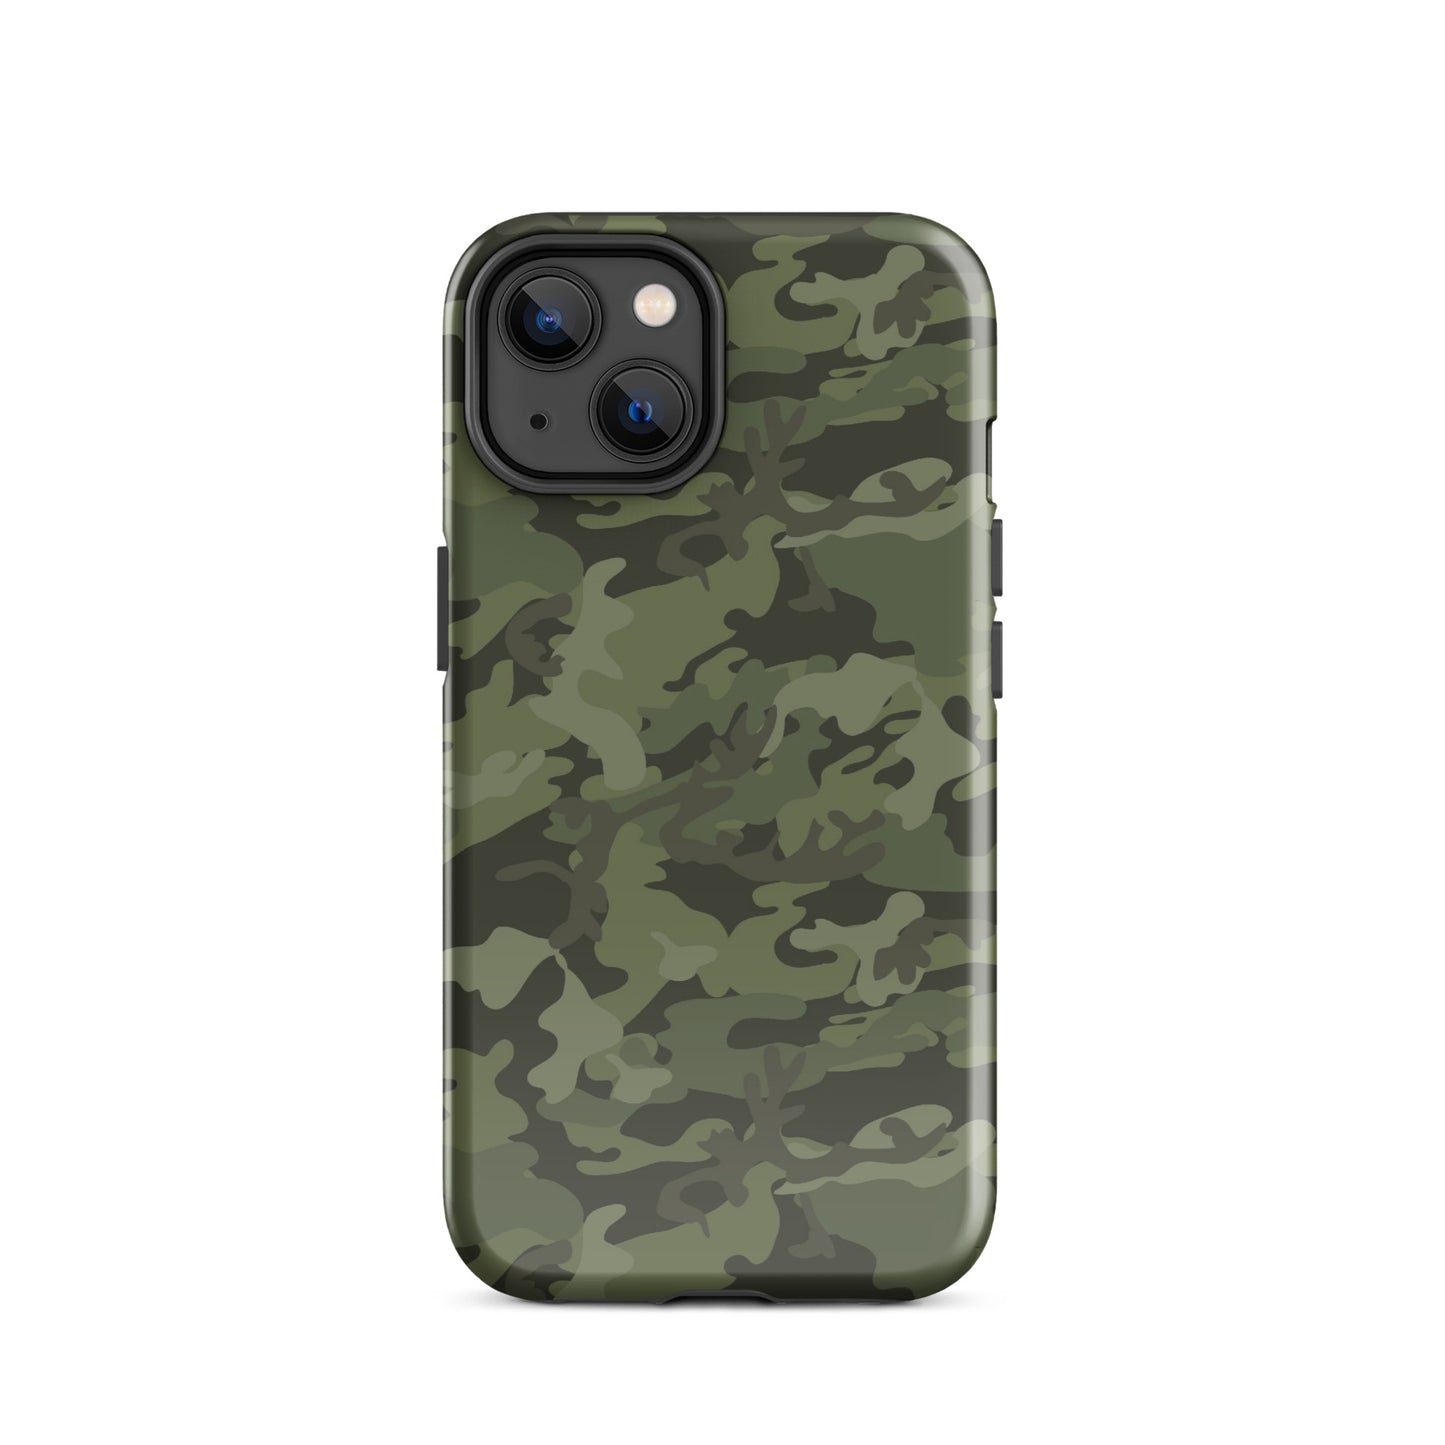 Sniper Takeout - iPhone Tough Case